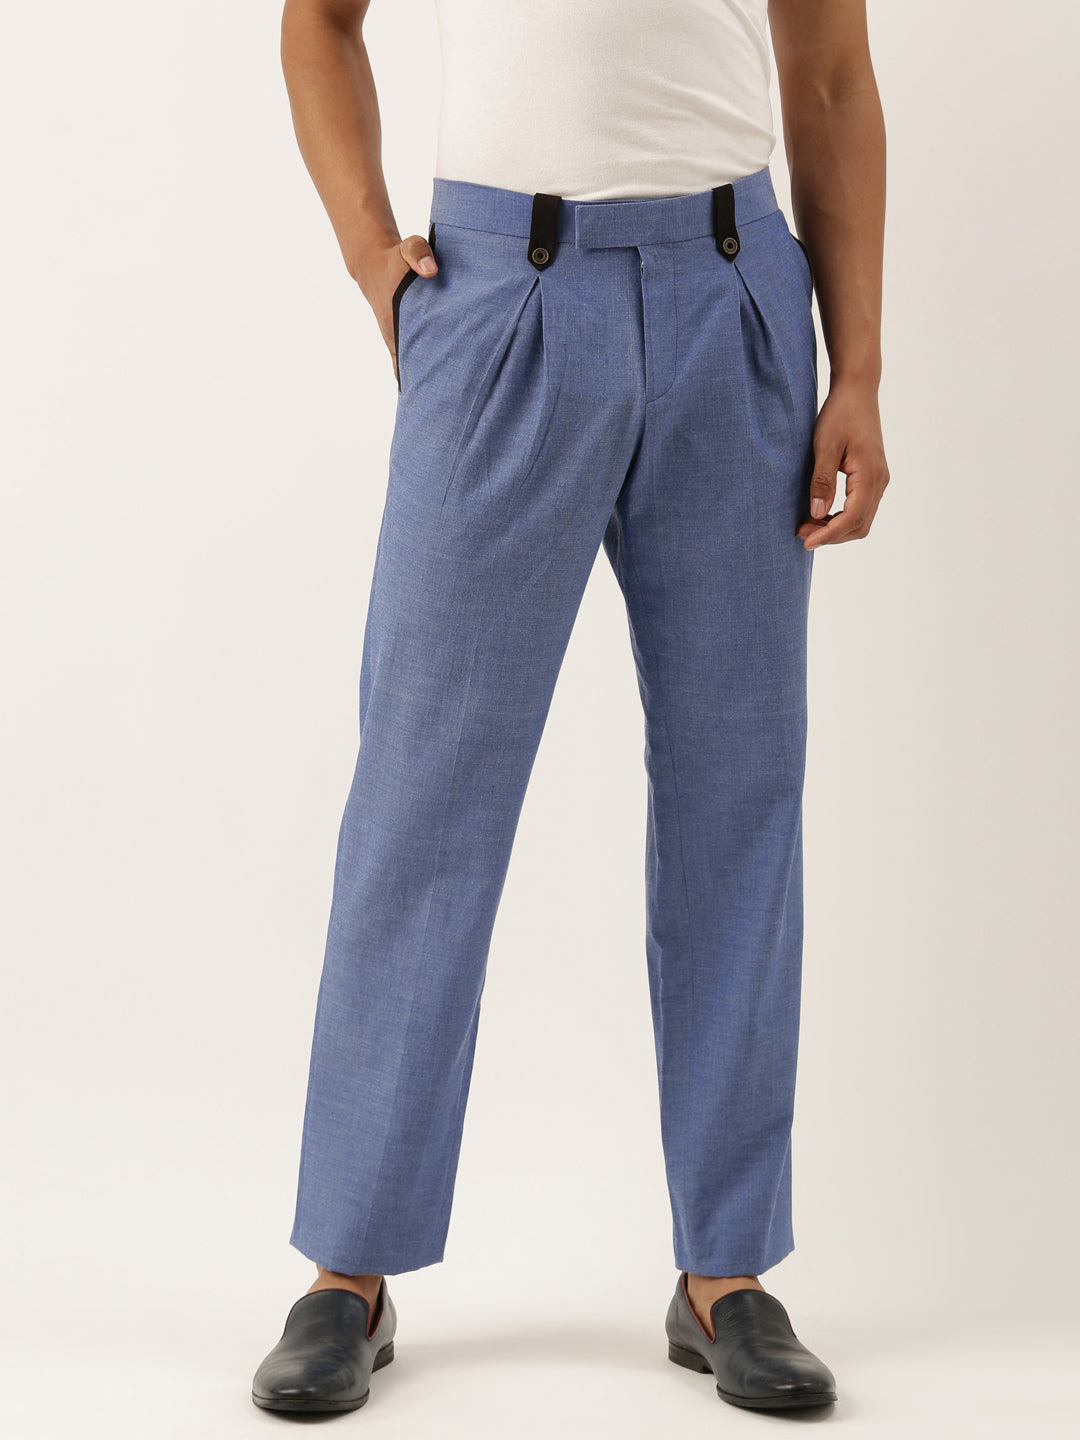 Double Pleated Trouser  Navy  SHADES OF GREY BY MICAH COHEN